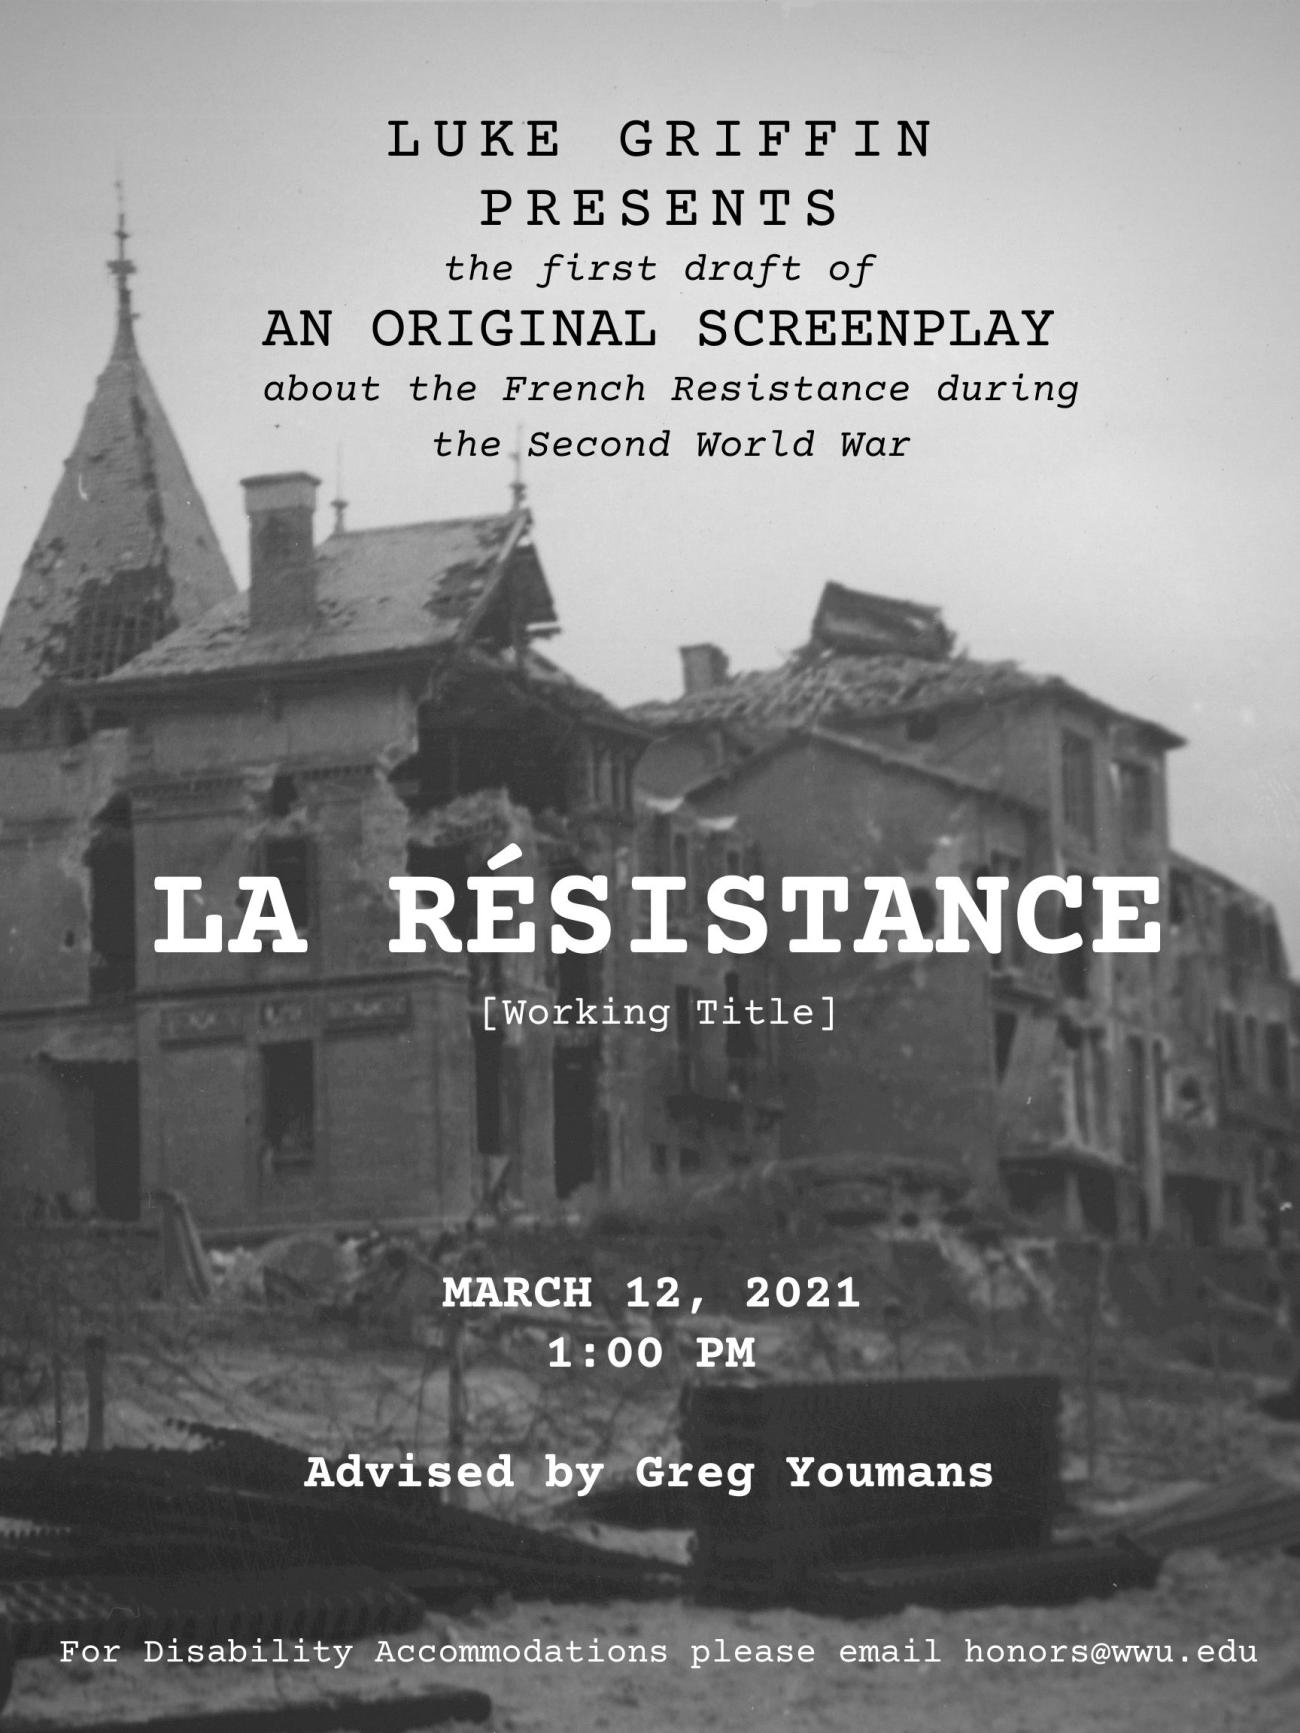 A black-and-white picture of destroyed brick buildings, with the text: "Luke Griffin presents an original screenplay about the French Resistance during the Second World War. LA RÉSISTANCE [Working Title]. March 12, 2021, 1:00 PM. Advised by Greg Youmans. For Disability Accomodation, please email honors@wwu.edu"